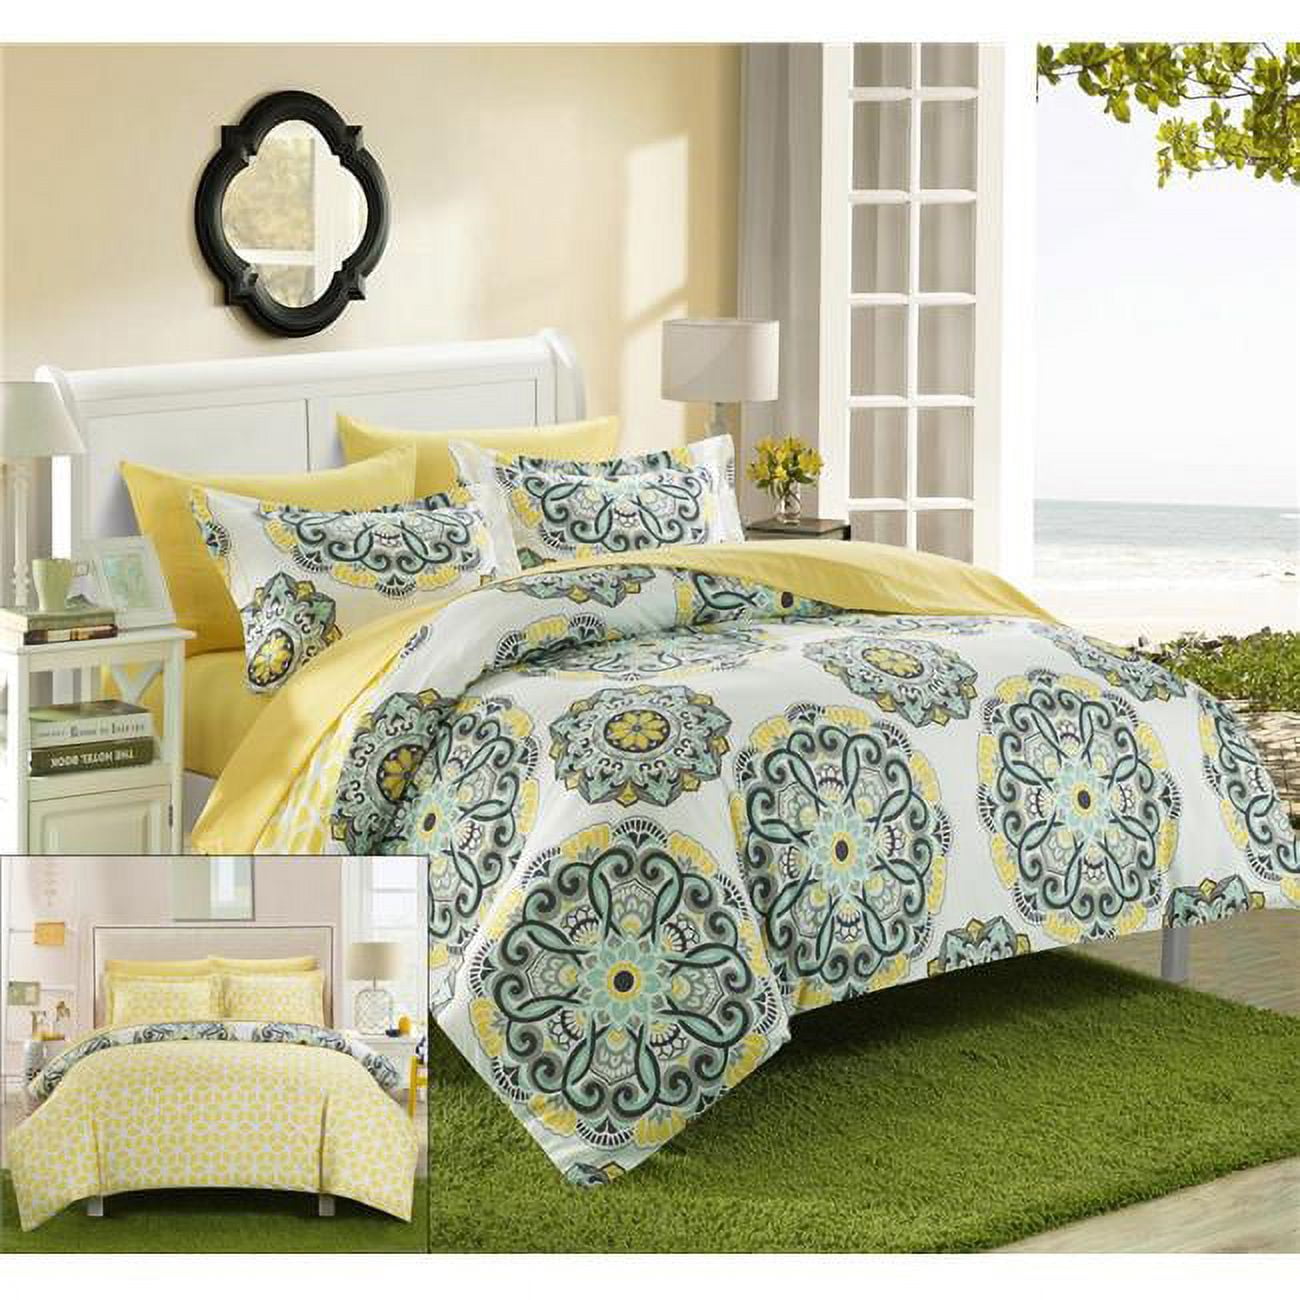 Ds3491-us 2 Piece Sardinia Super Soft Microfiber Large Printed Medallion Reversible With Geometric Printed Backing Twin Duvet Set, Yellow